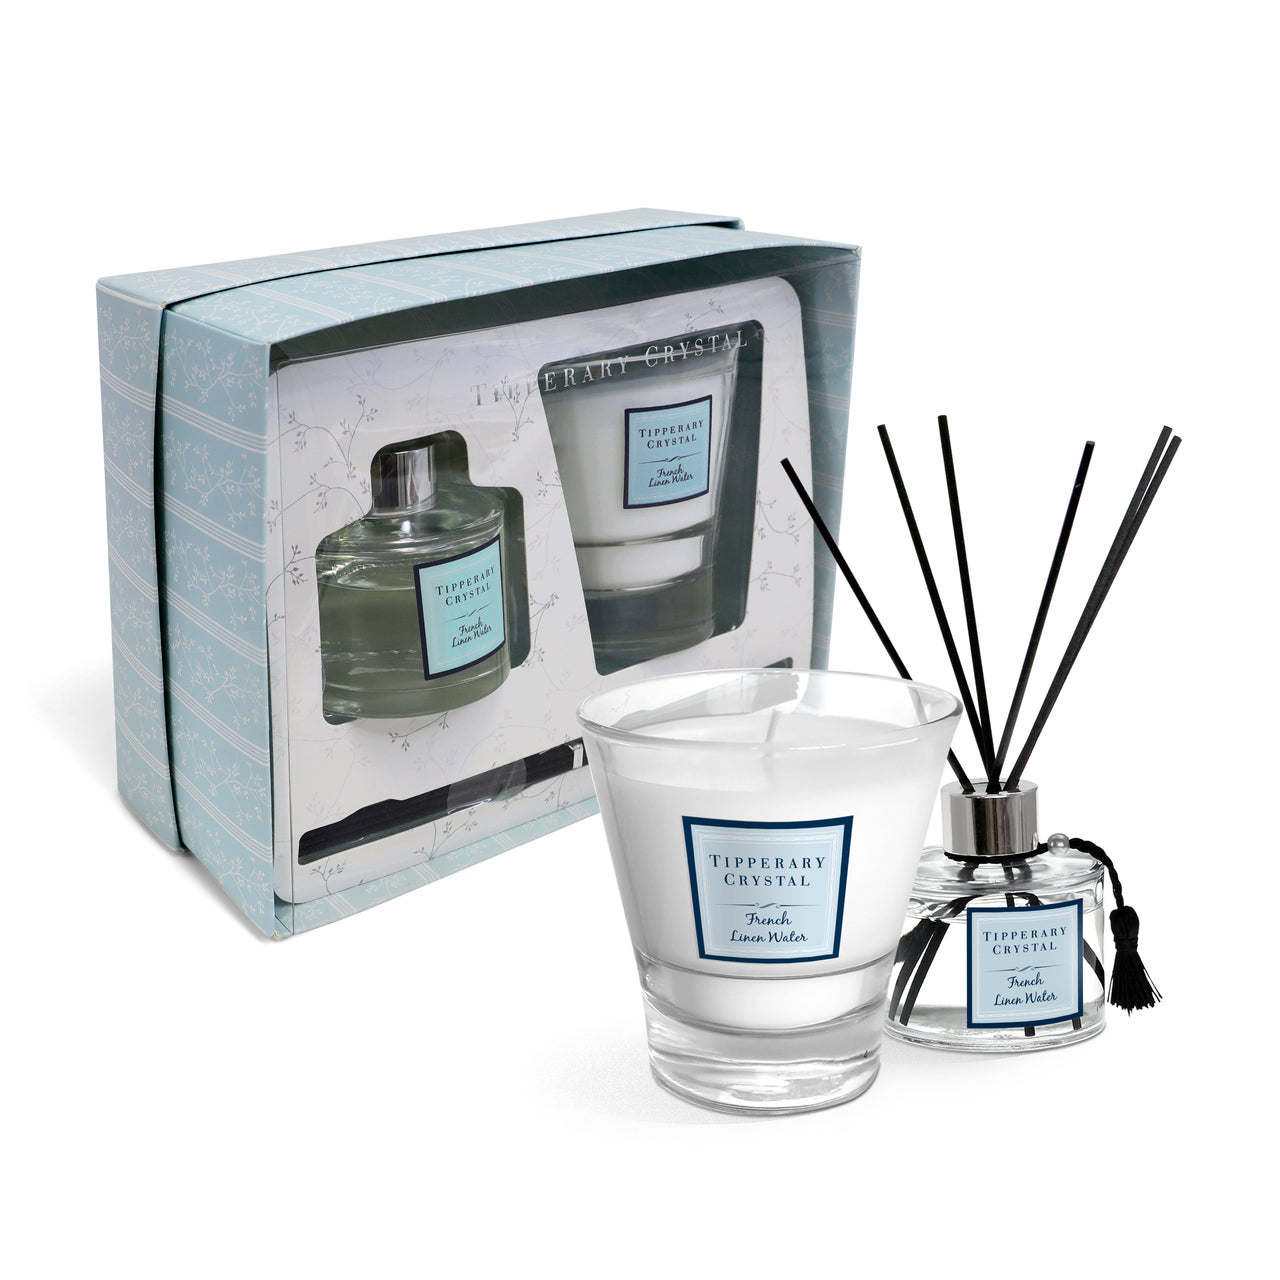 Tipperary Crystal French Linen Candle & Diffuser Gift Set NEW 2021